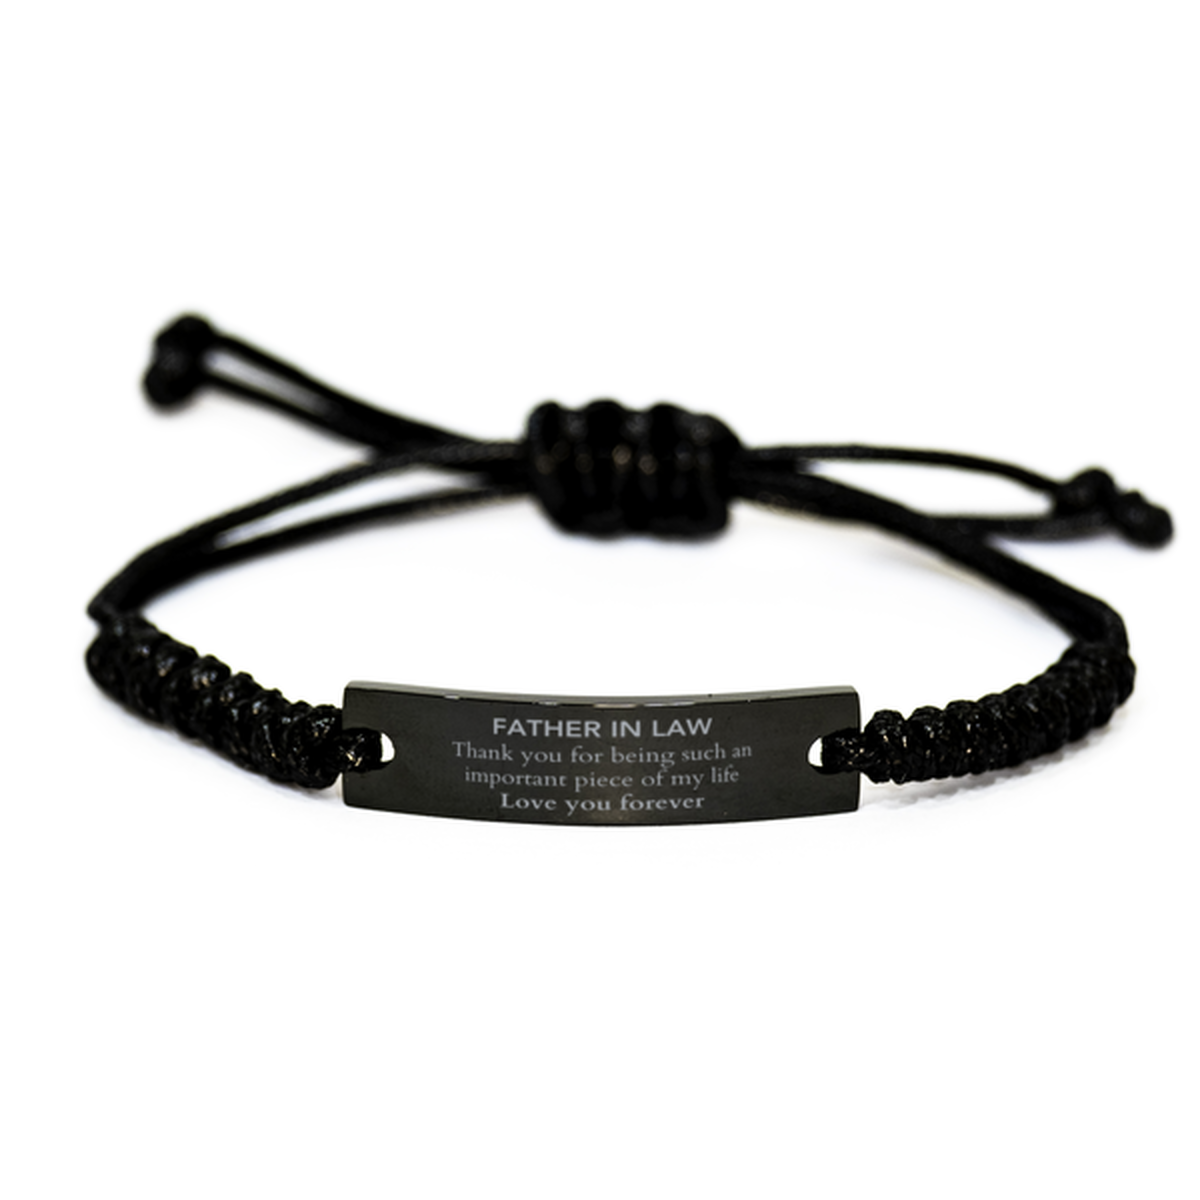 Appropriate Father In Law Black Rope Bracelet Epic Birthday Gifts for Father In Law Thank you for being such an important piece of my life Father In Law Christmas Mothers Fathers Day